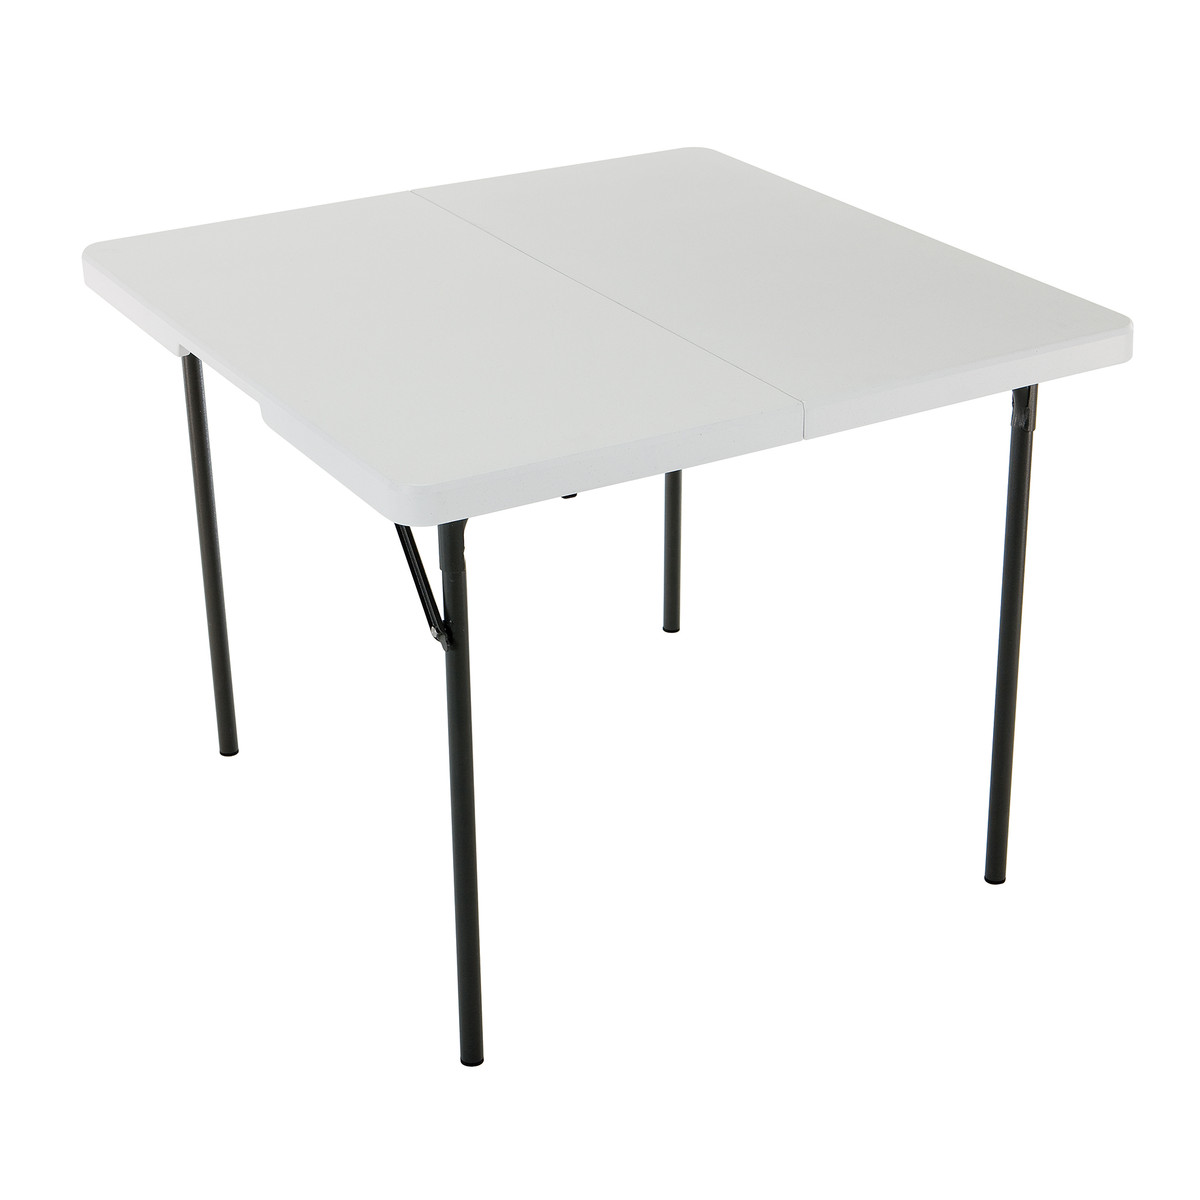 Lifetime Products 80100 Folding Table White Polyethylene With Steel Frame,